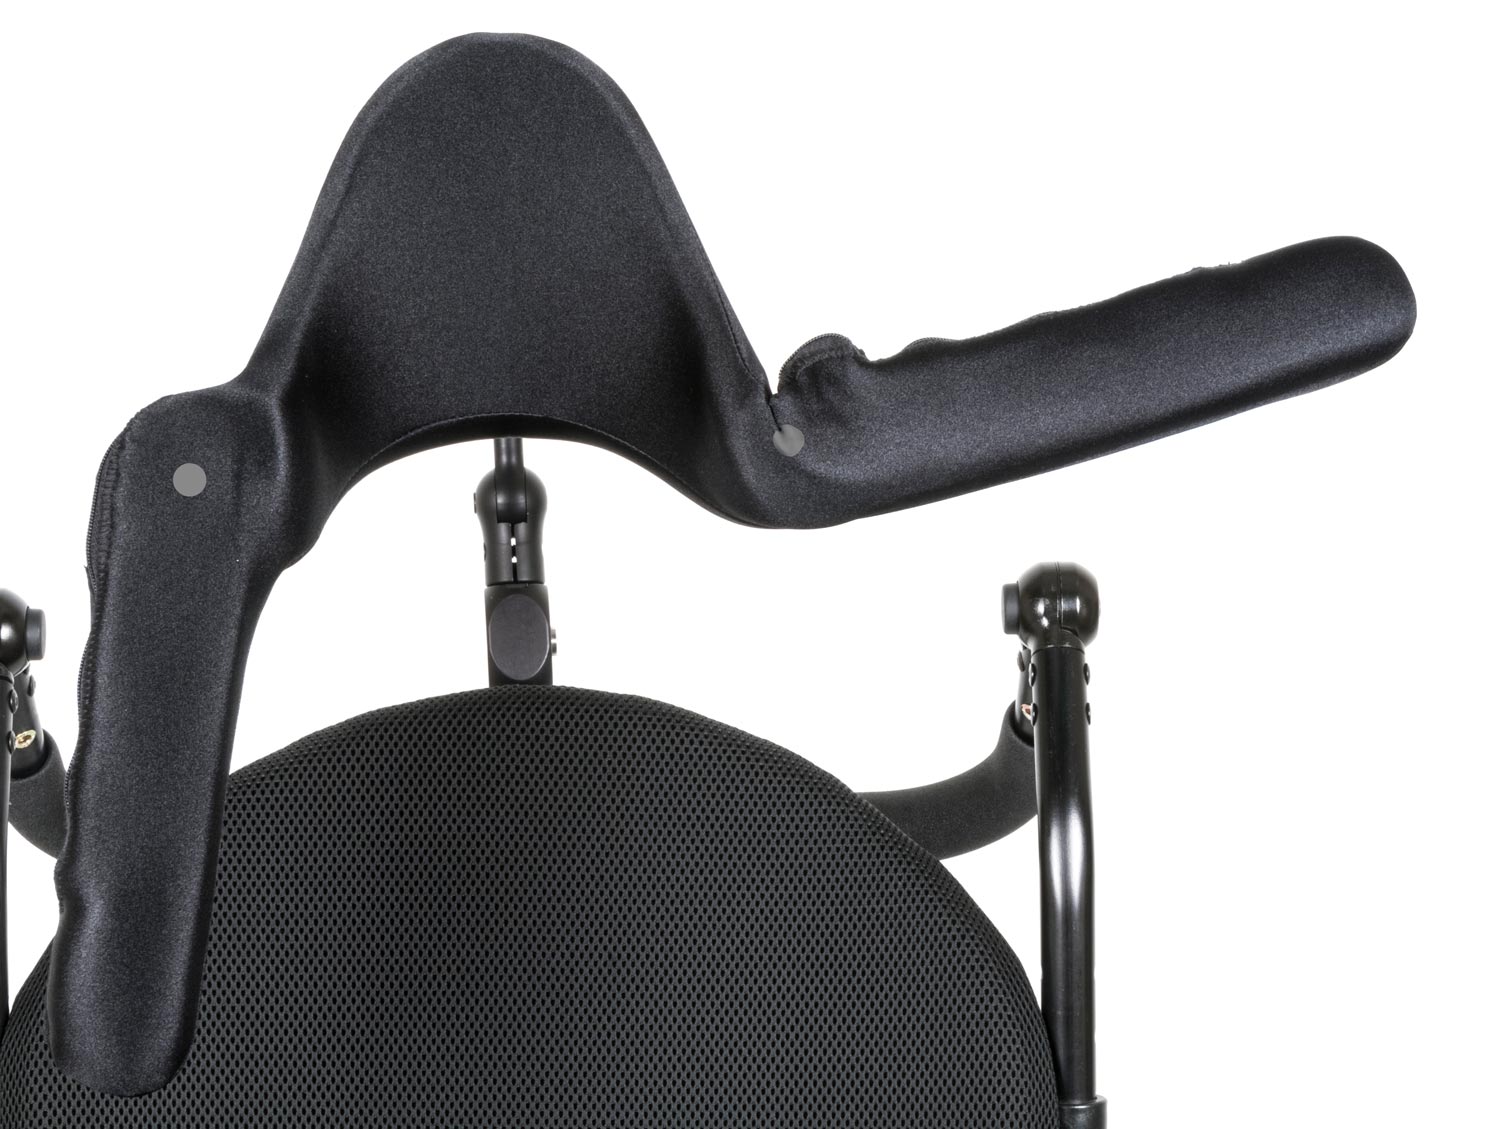 https://www.sunrisemedical.com/getattachment/seating-positioning/Whitmyer/Head-Positioning/Whitmyer-Heads-Up/Product-Features/1-Innovative-Anterior-Stabilization-Arms/feature1.jpg.aspx?lang=en-US&width=1500&height=1129&ext=.jpg%}?width=960